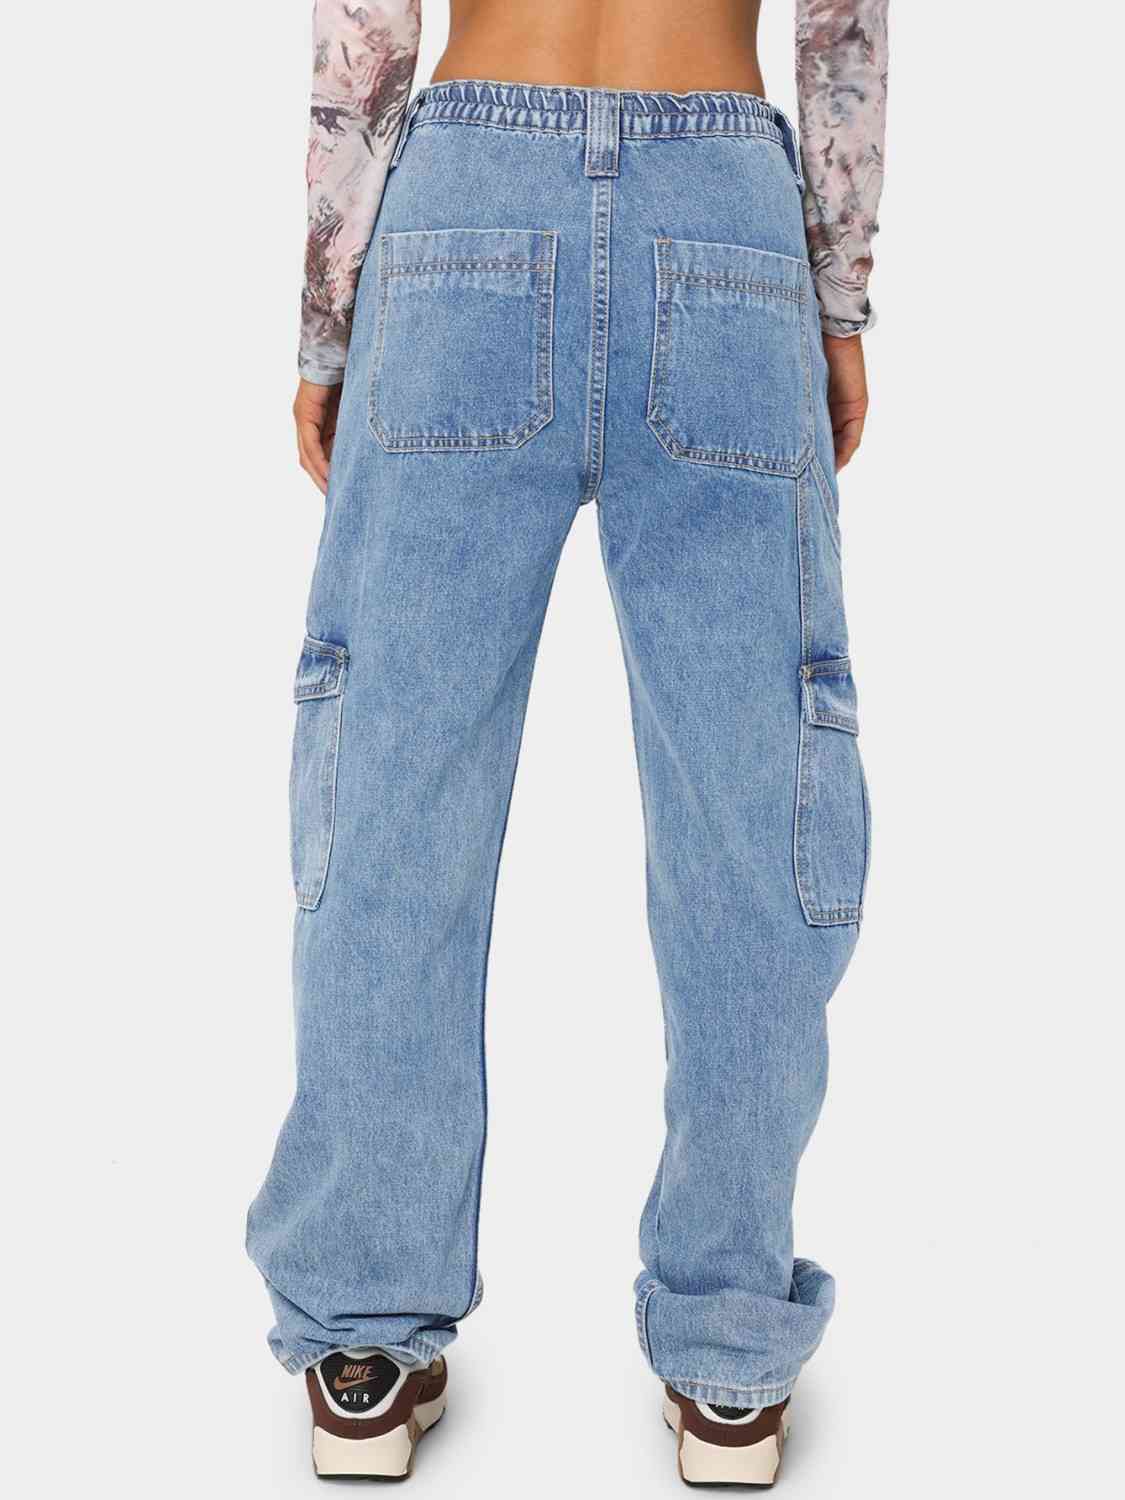 Lavender Straight Jeans with Pockets Denim